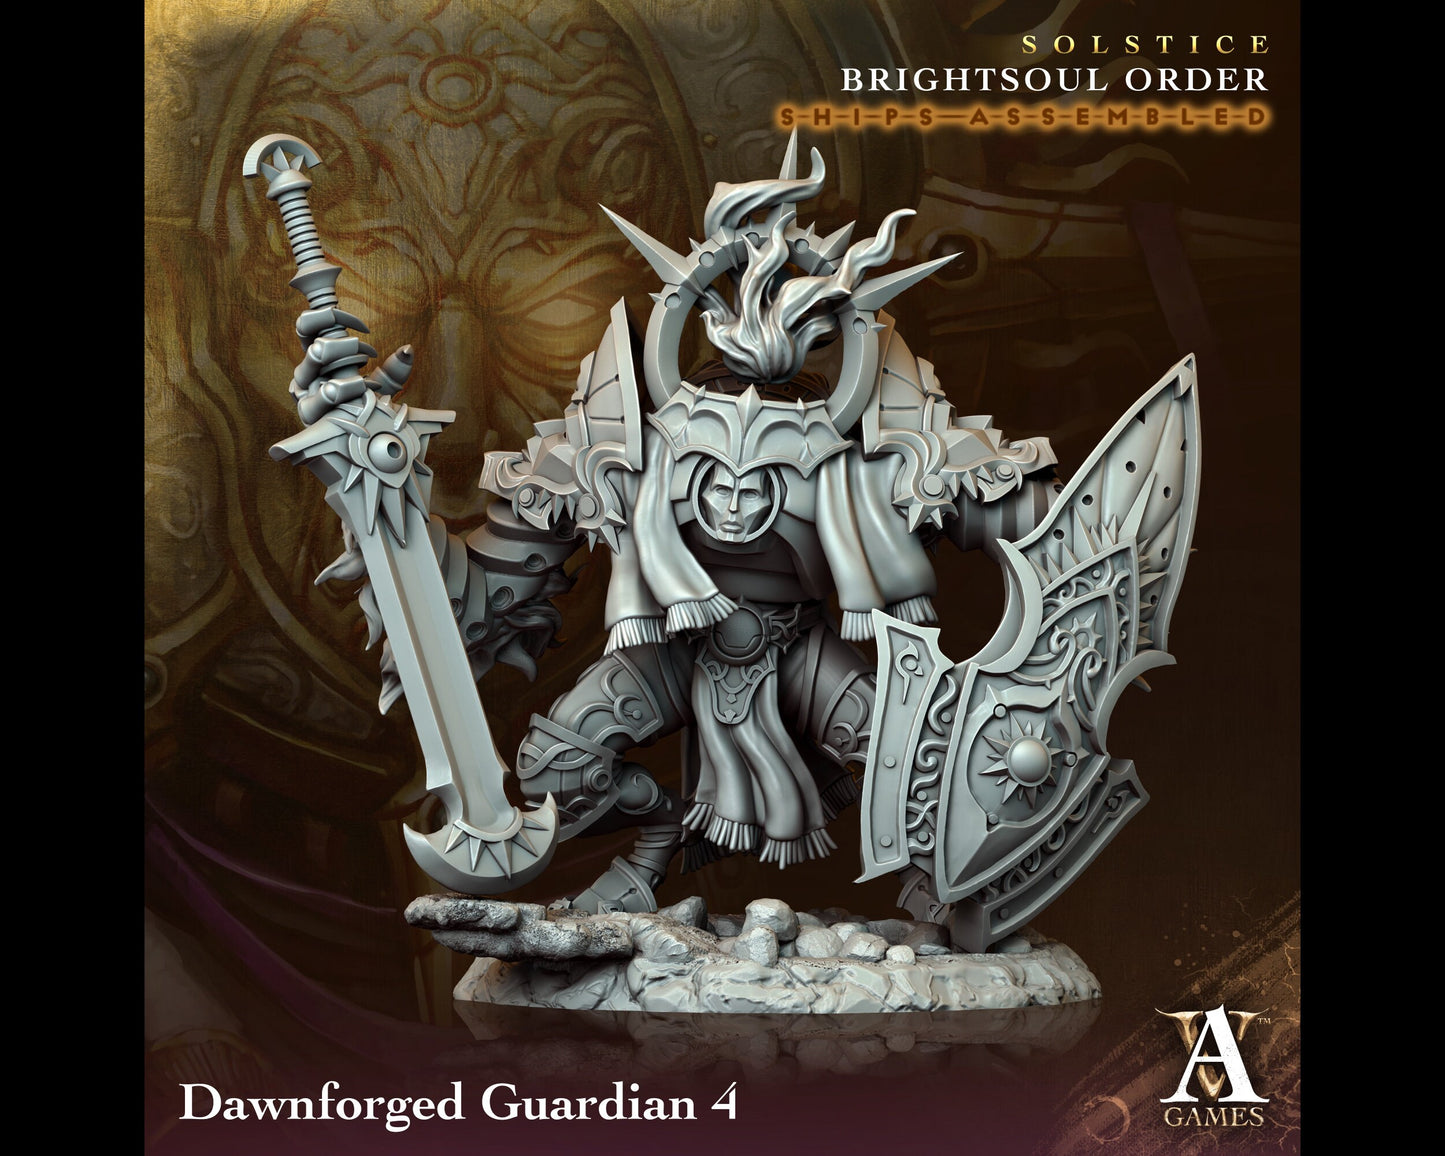 Dawnforged Guardian 4 - Brightsoul Order - Highly Detailed Resin 8k 3D Printed Miniature